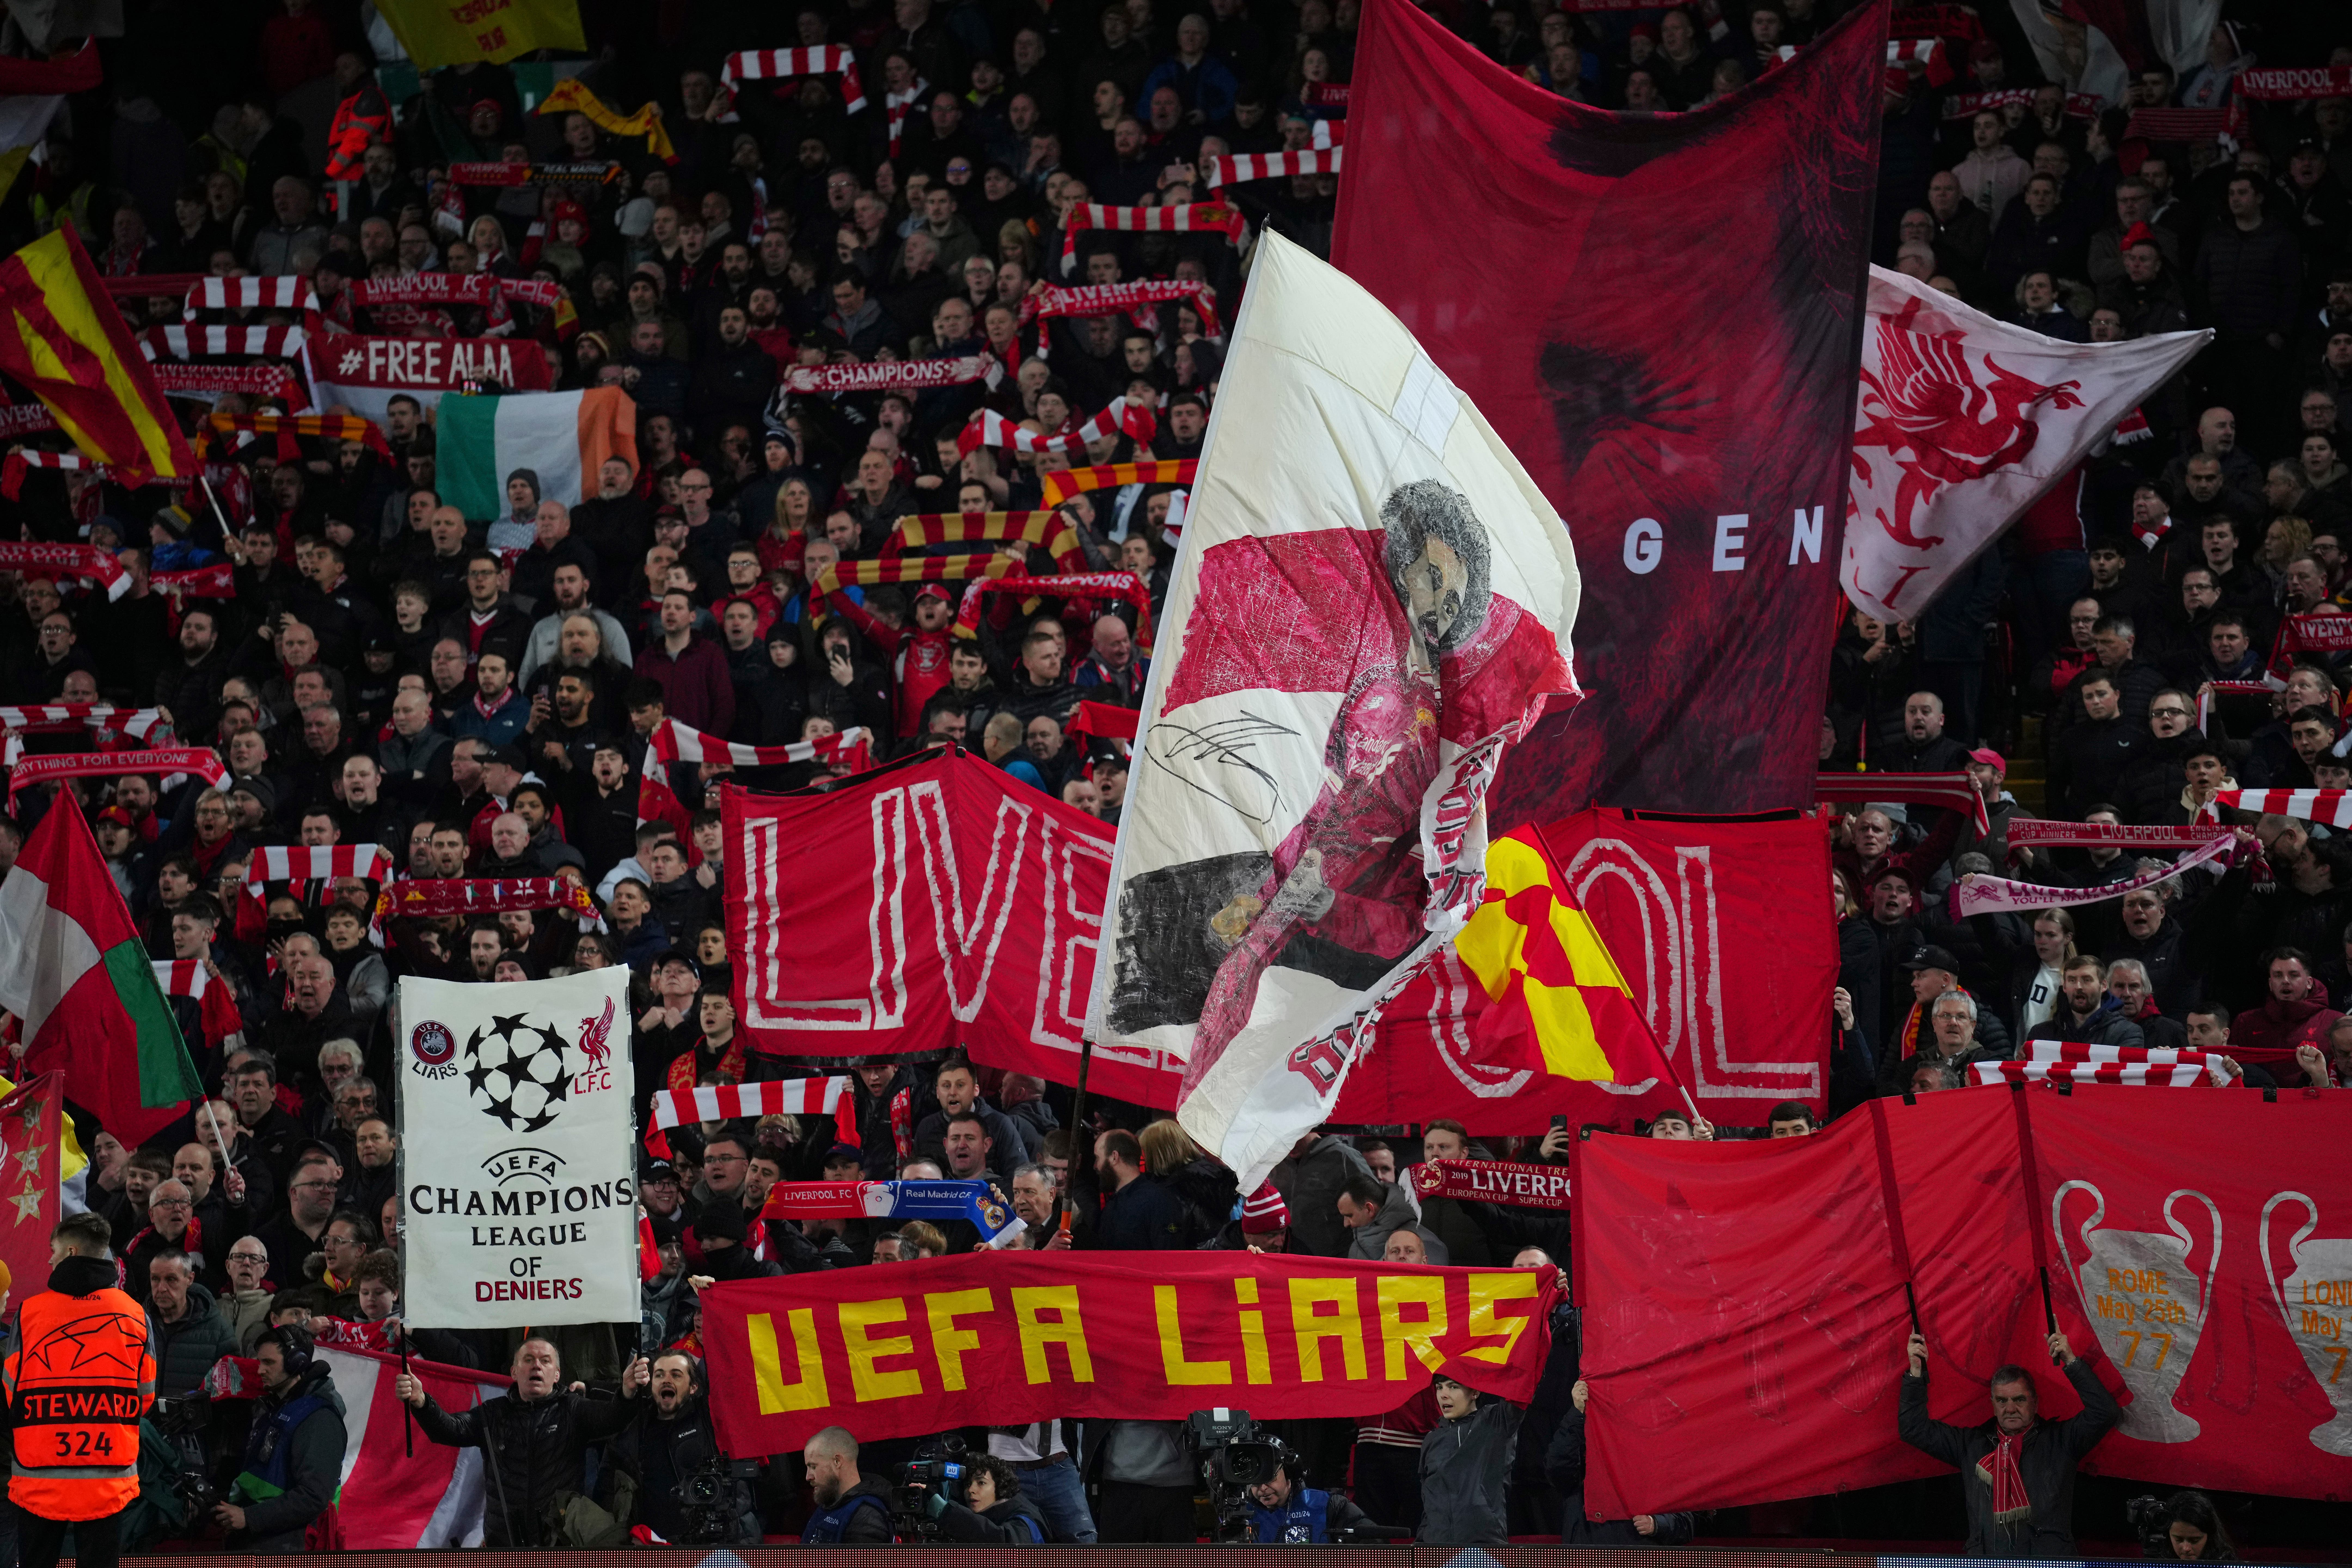 Liverpool fans against Uefa Real Madrid match |